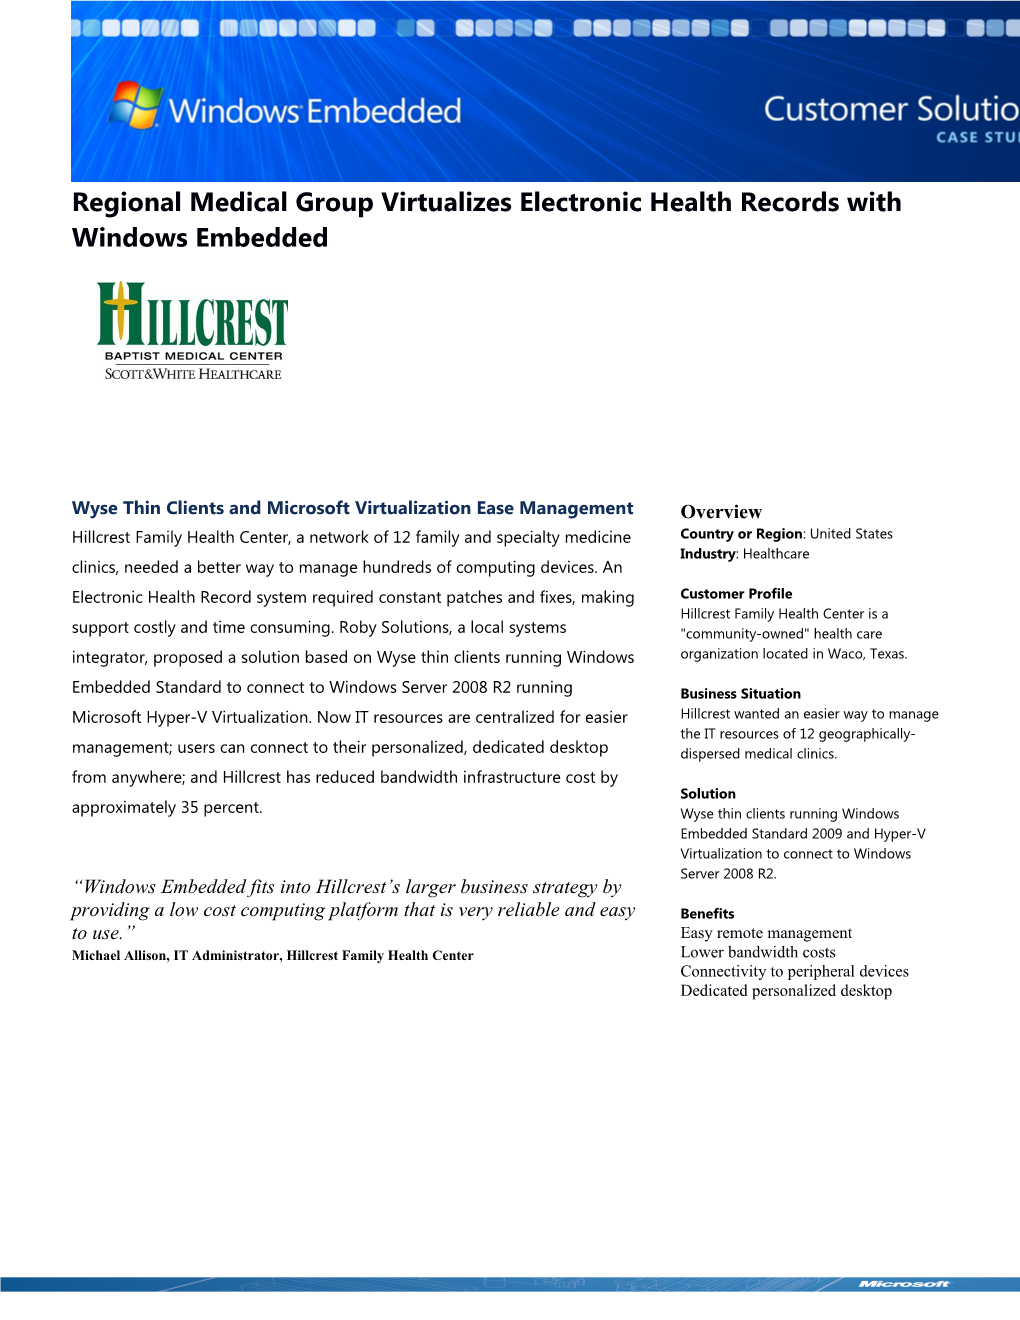 Metia Windows Embedded Regional Medical Group Virtualizes Electronic Health Records With